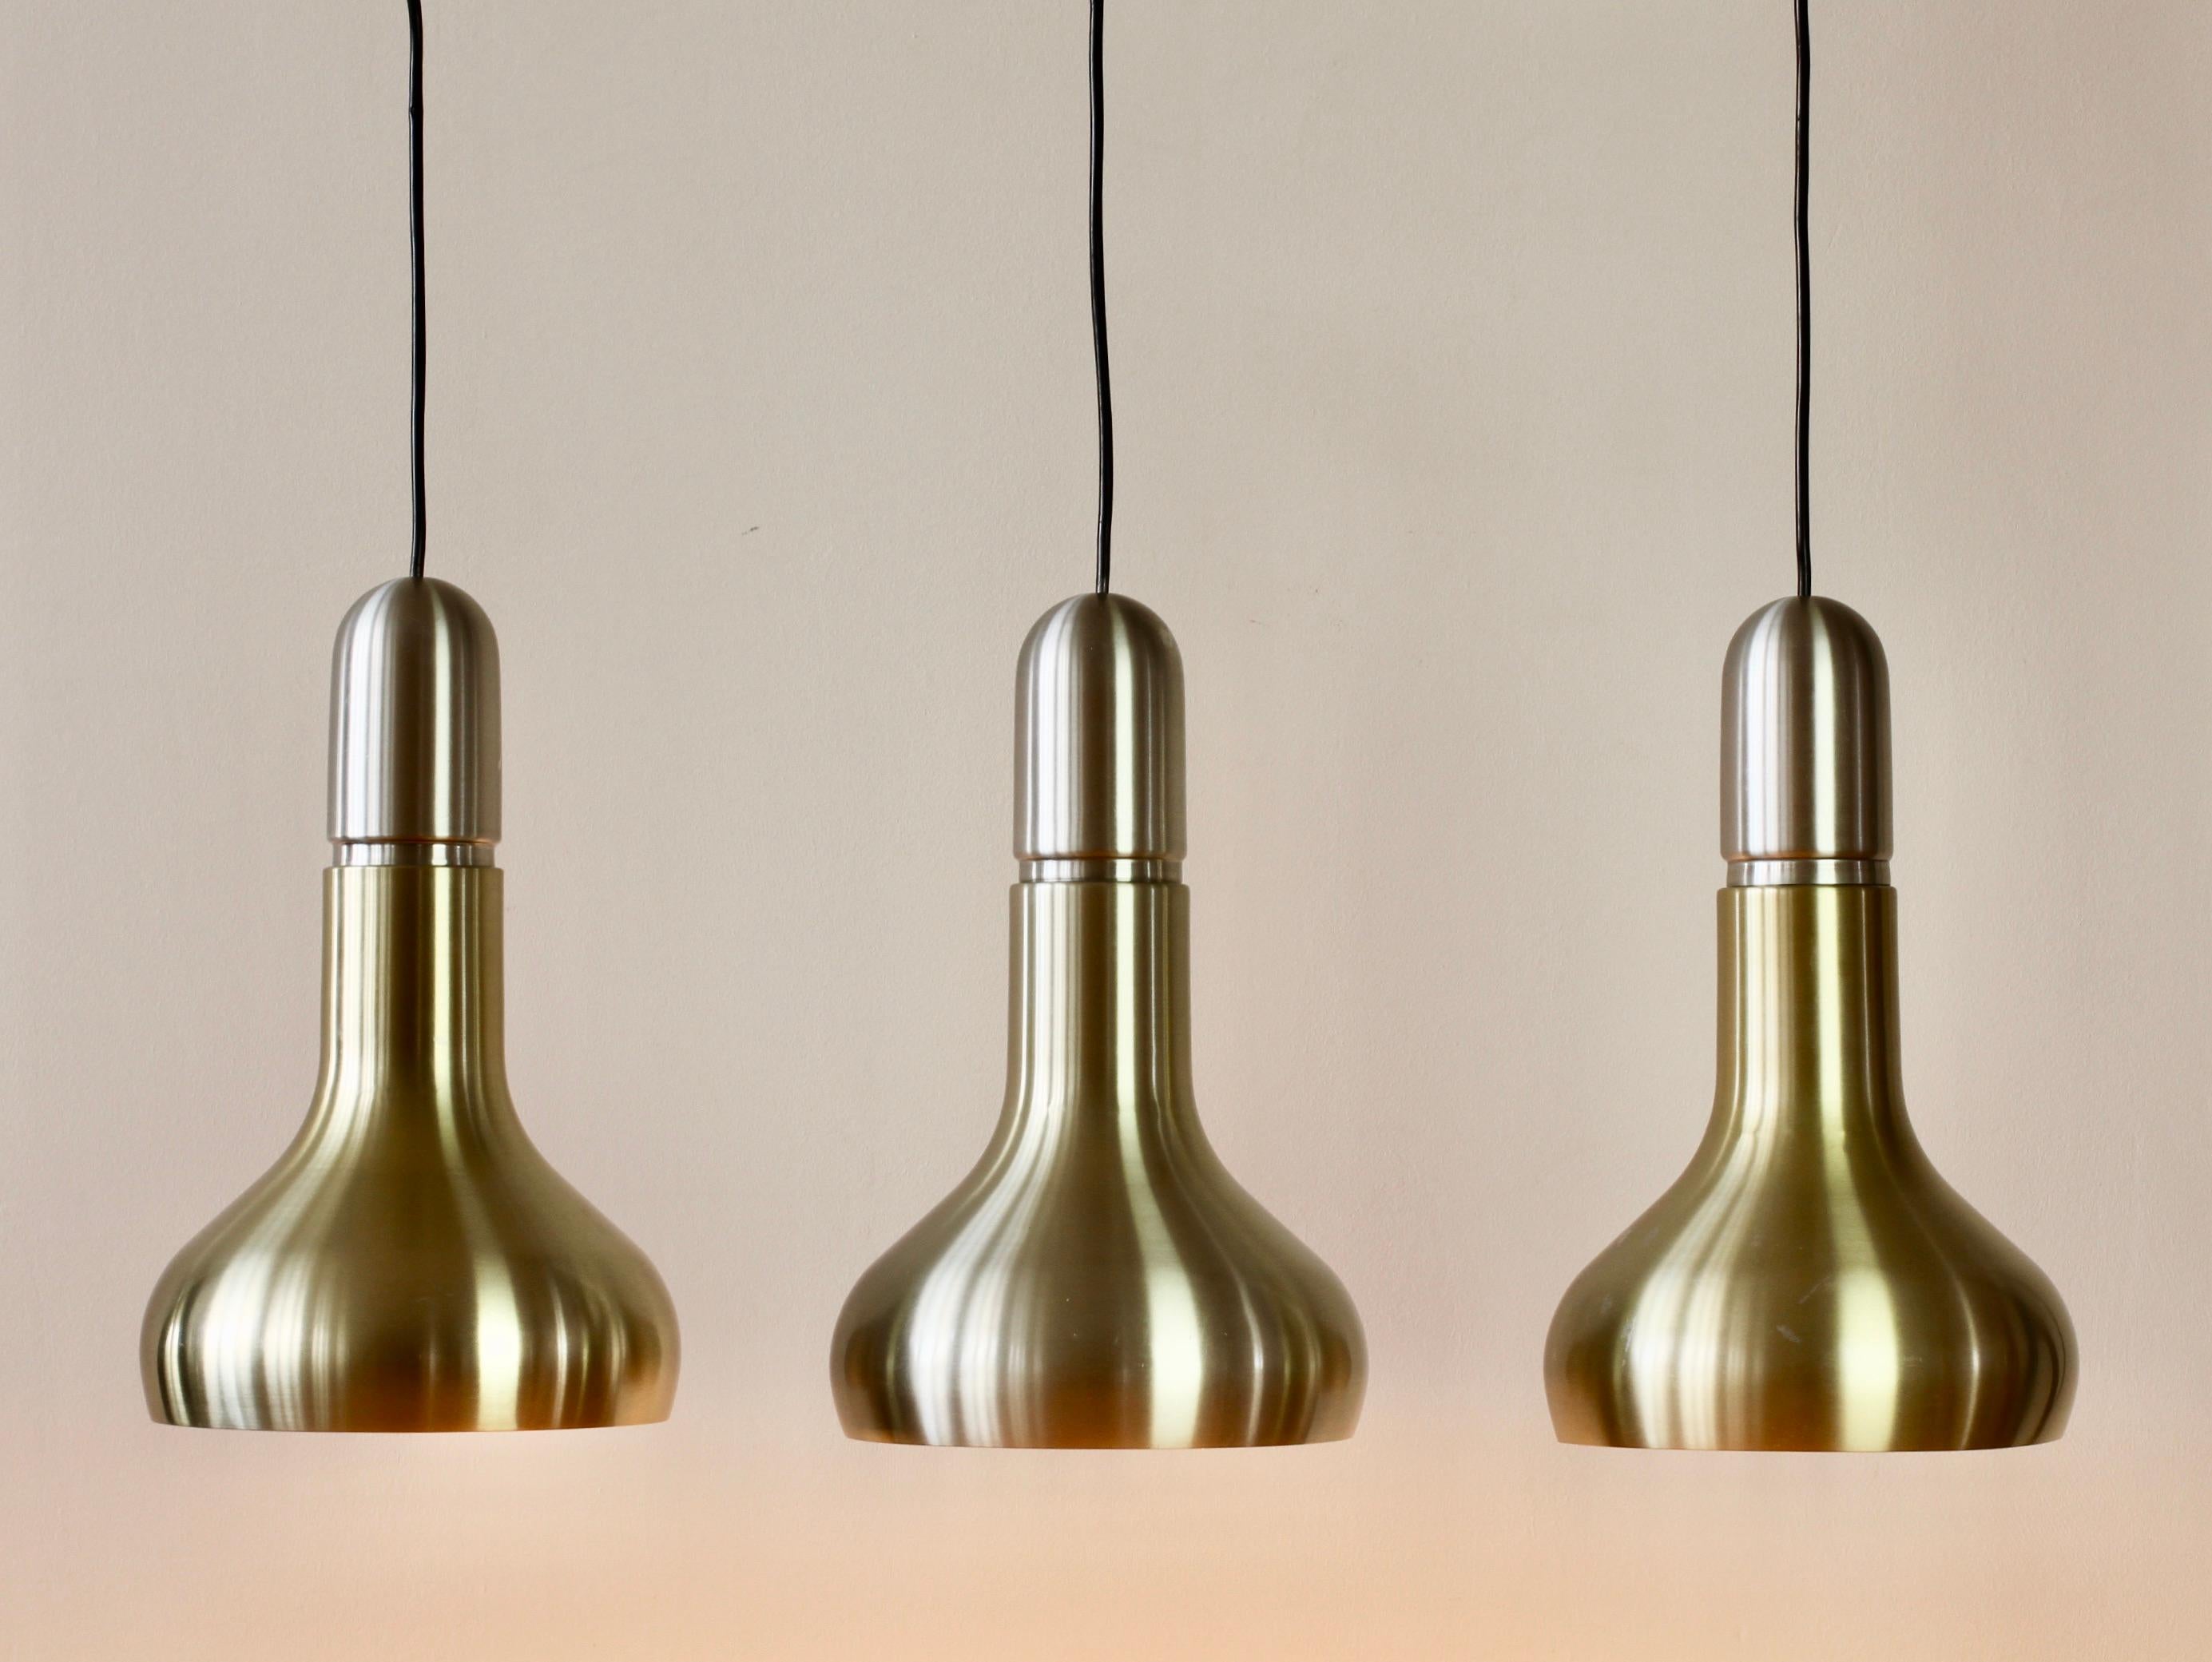 Mid-Century Modern hanging pendant ceiling lights / lamps by Staff Leuchten of Germany, circa 1970s. Anodised aluminium with 'brass' / 'gold' colored finish and white painted inner finish to reflect the light. Wonderful round circular hanging